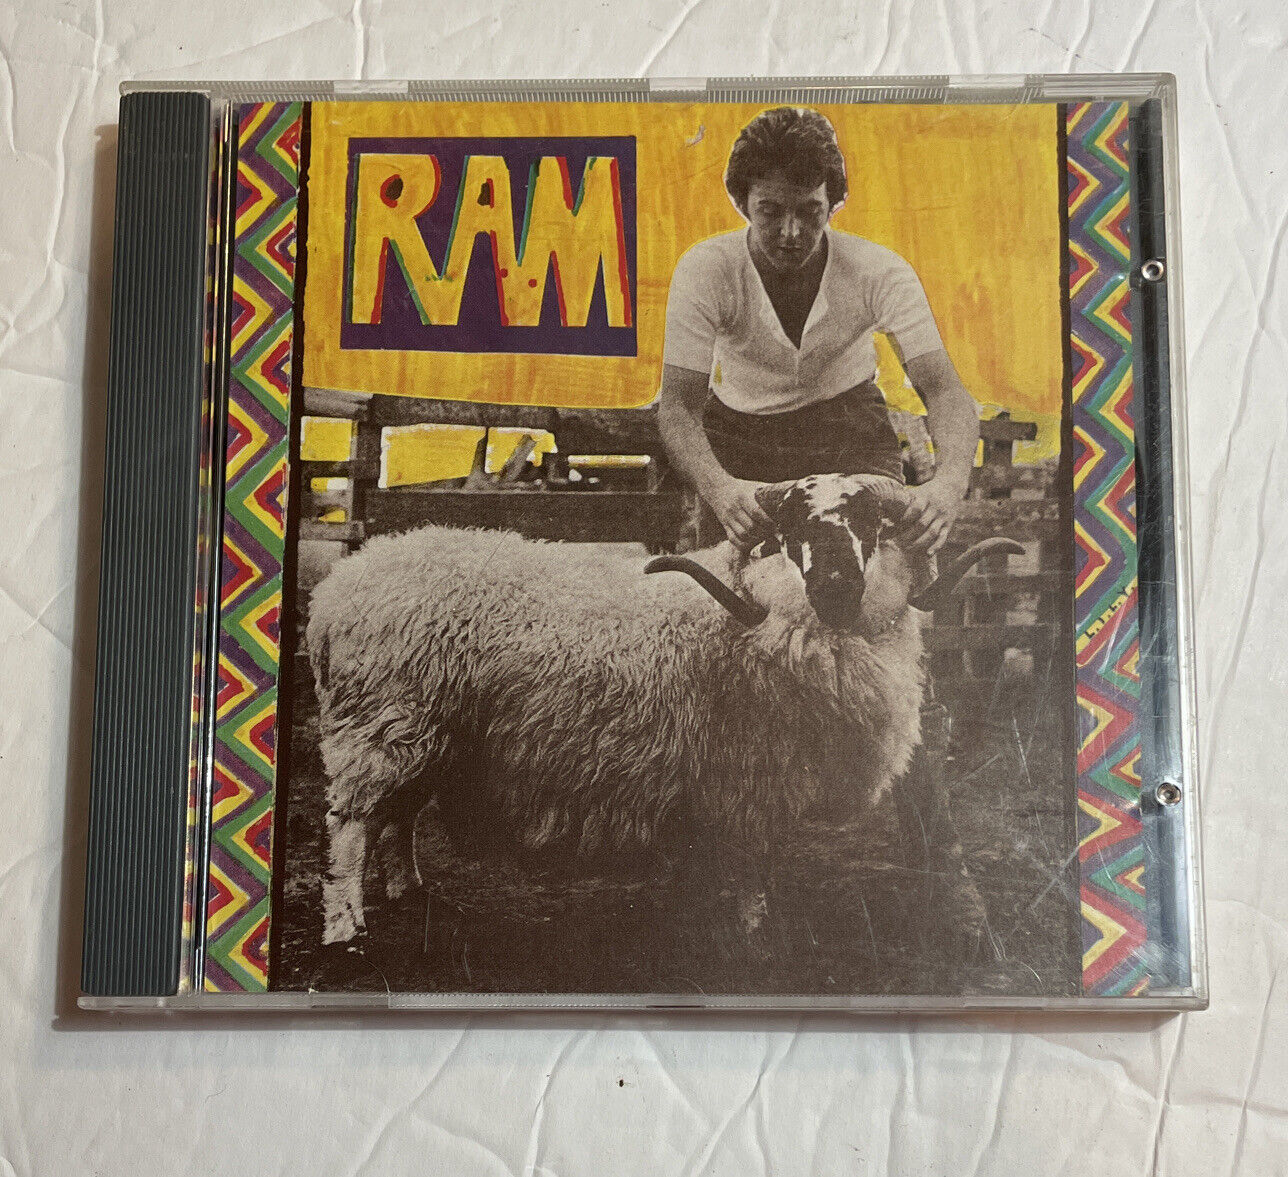 Paul and & Linda McCartney archive collection RAM special edition 2 disc cd set